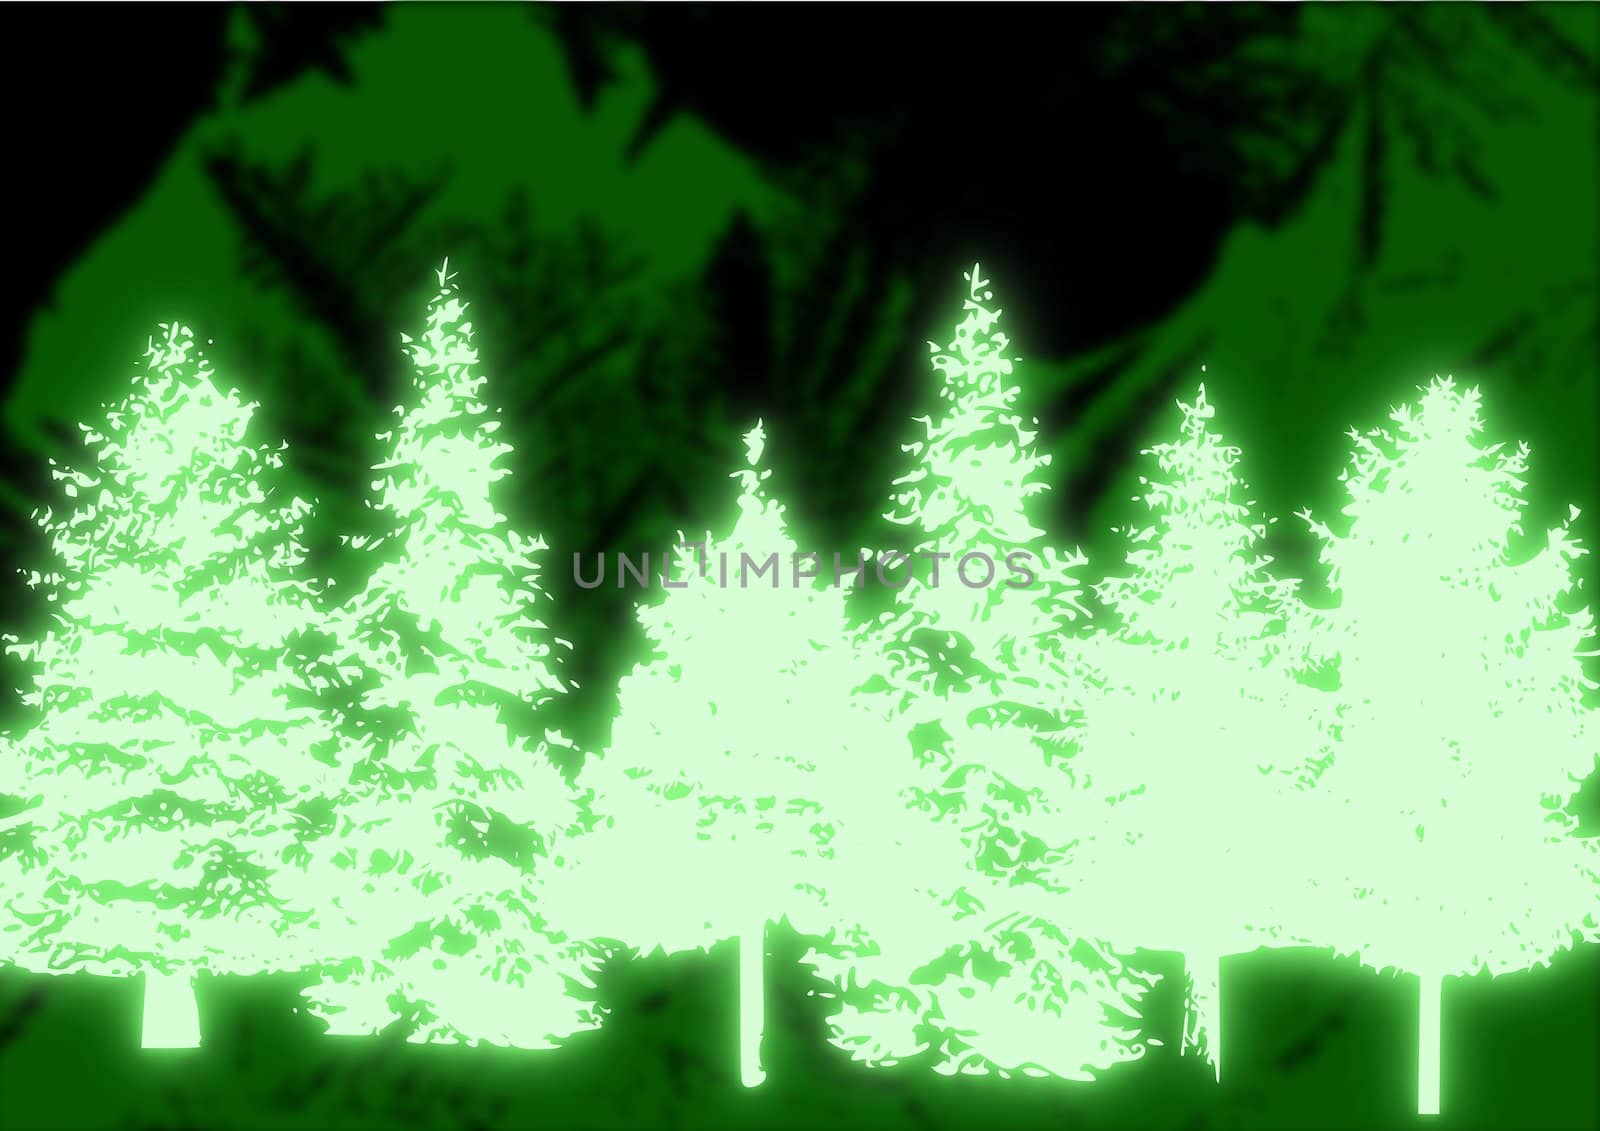 A line of glowing green Christmas trees against an abstract background.